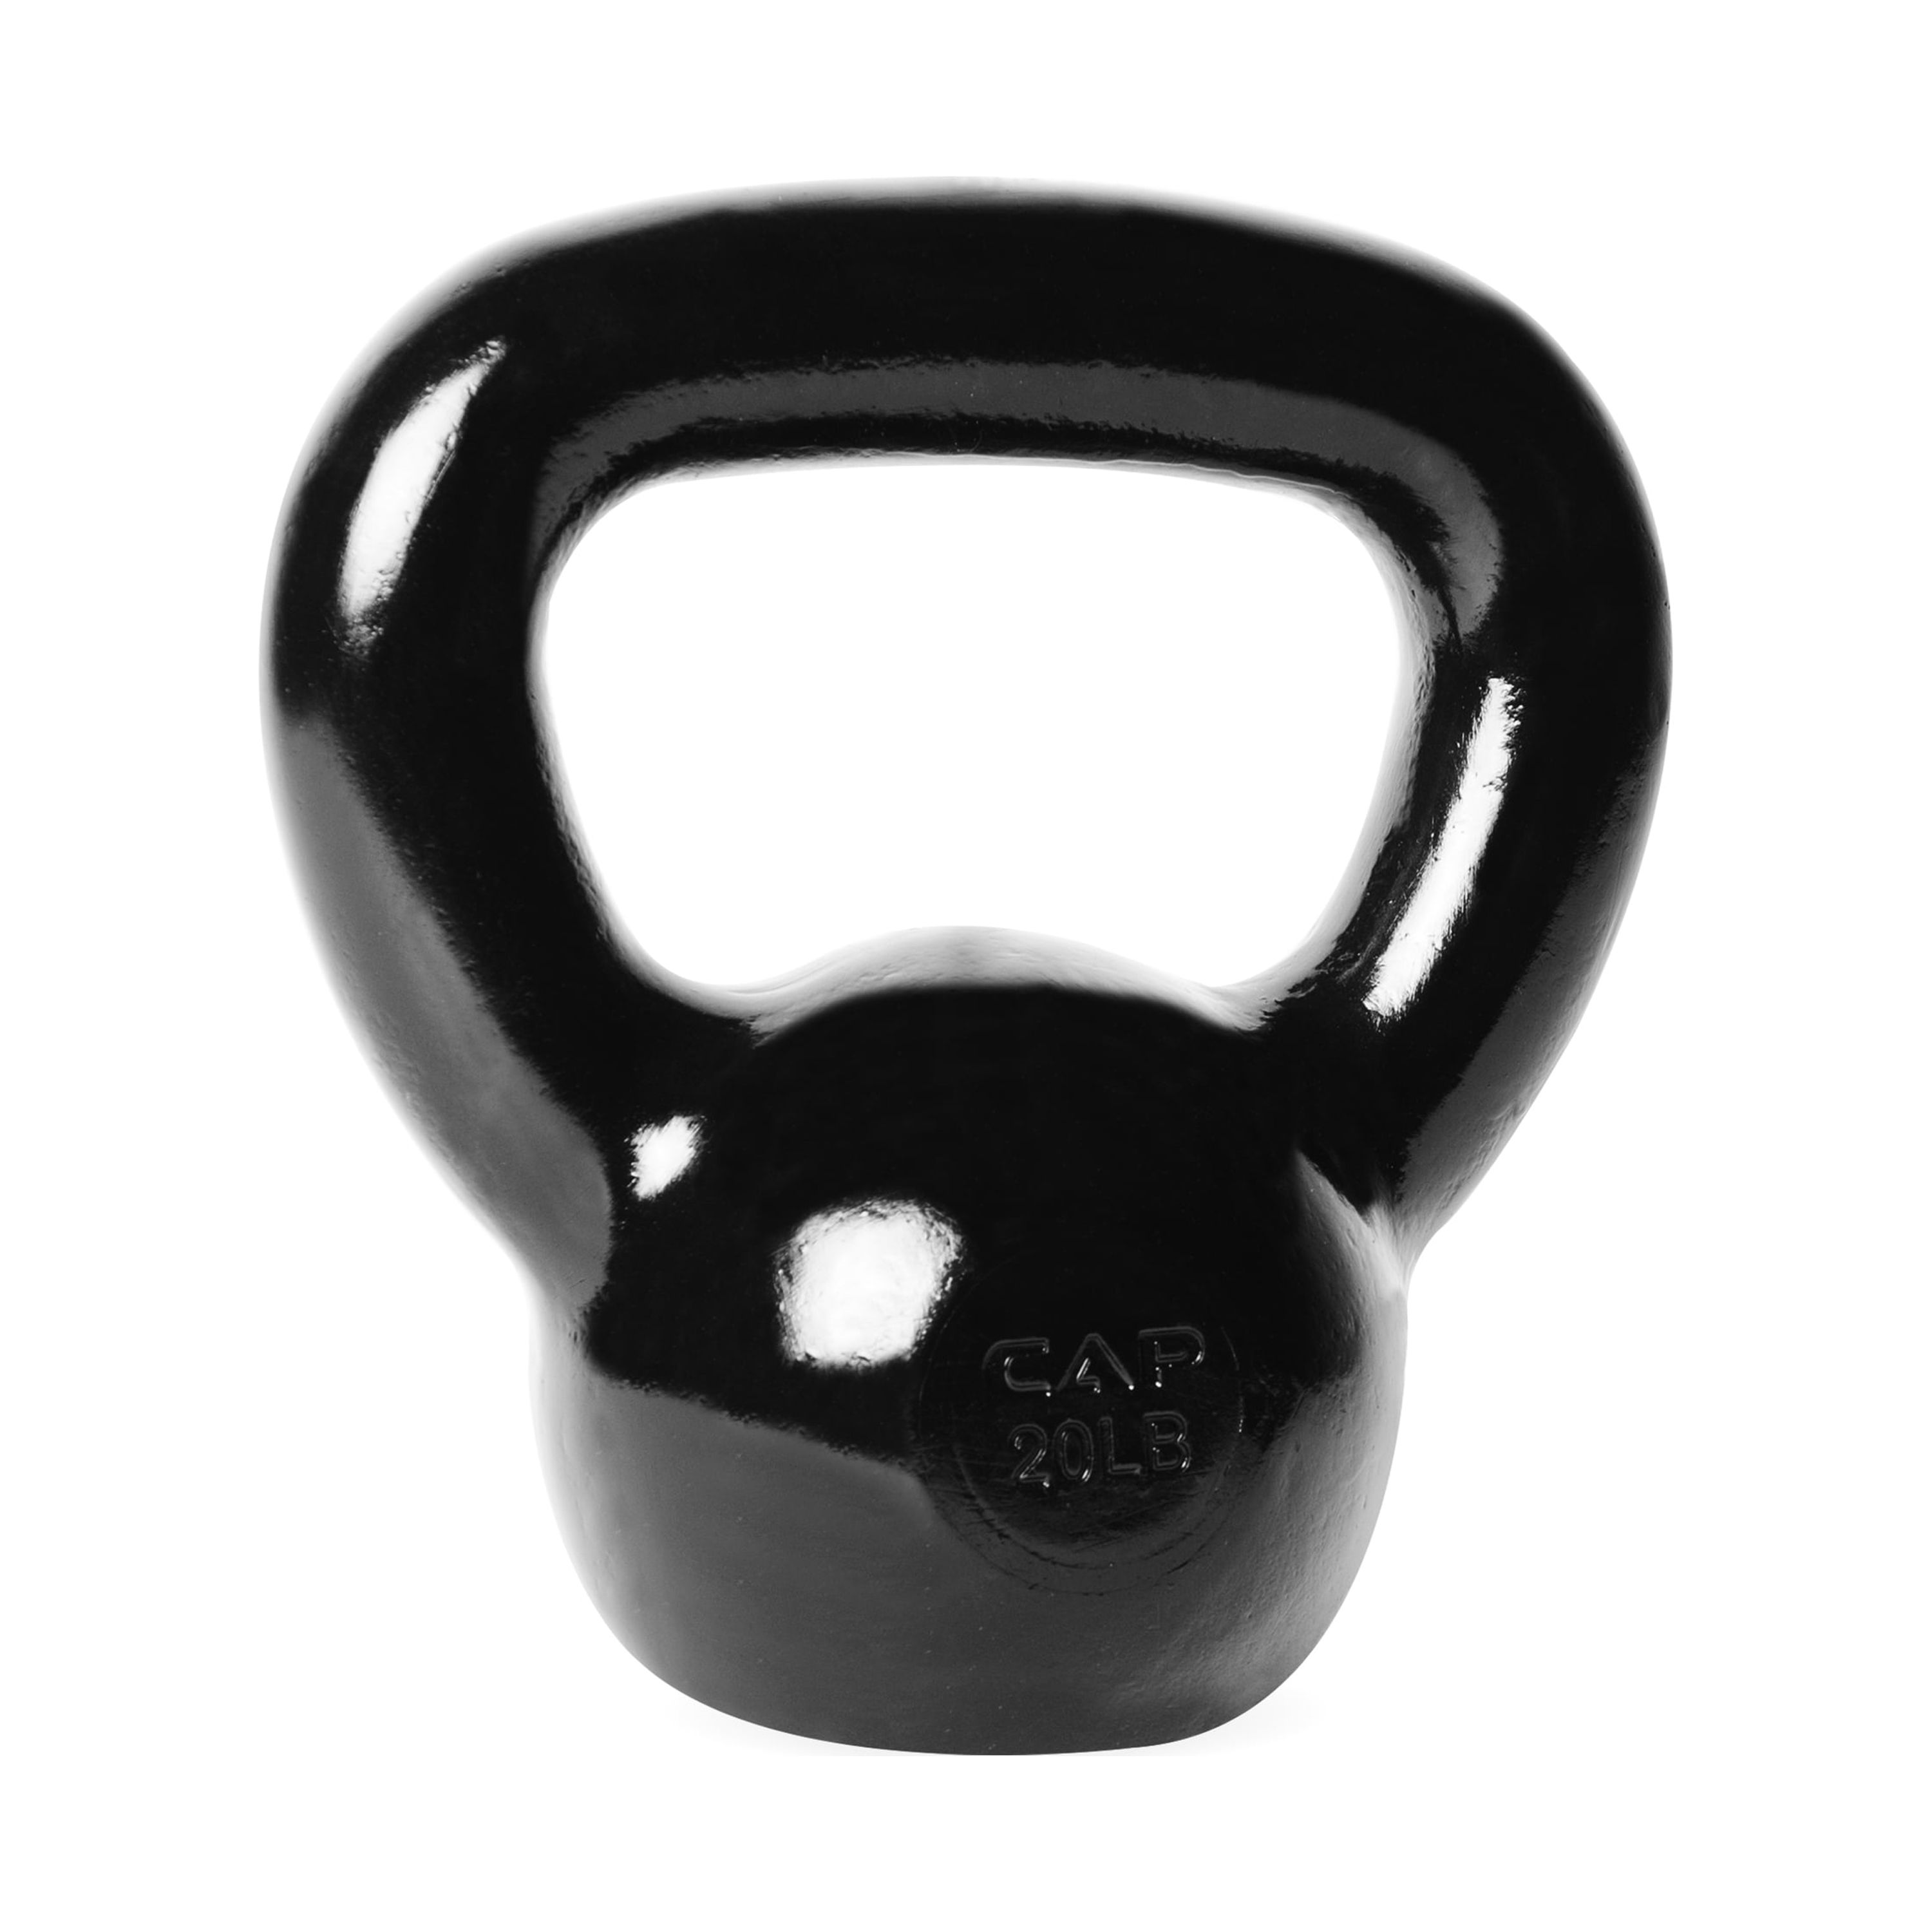 CAP Barbell Cast Iron Kettlebell, Black 20LBS - image 1 of 8